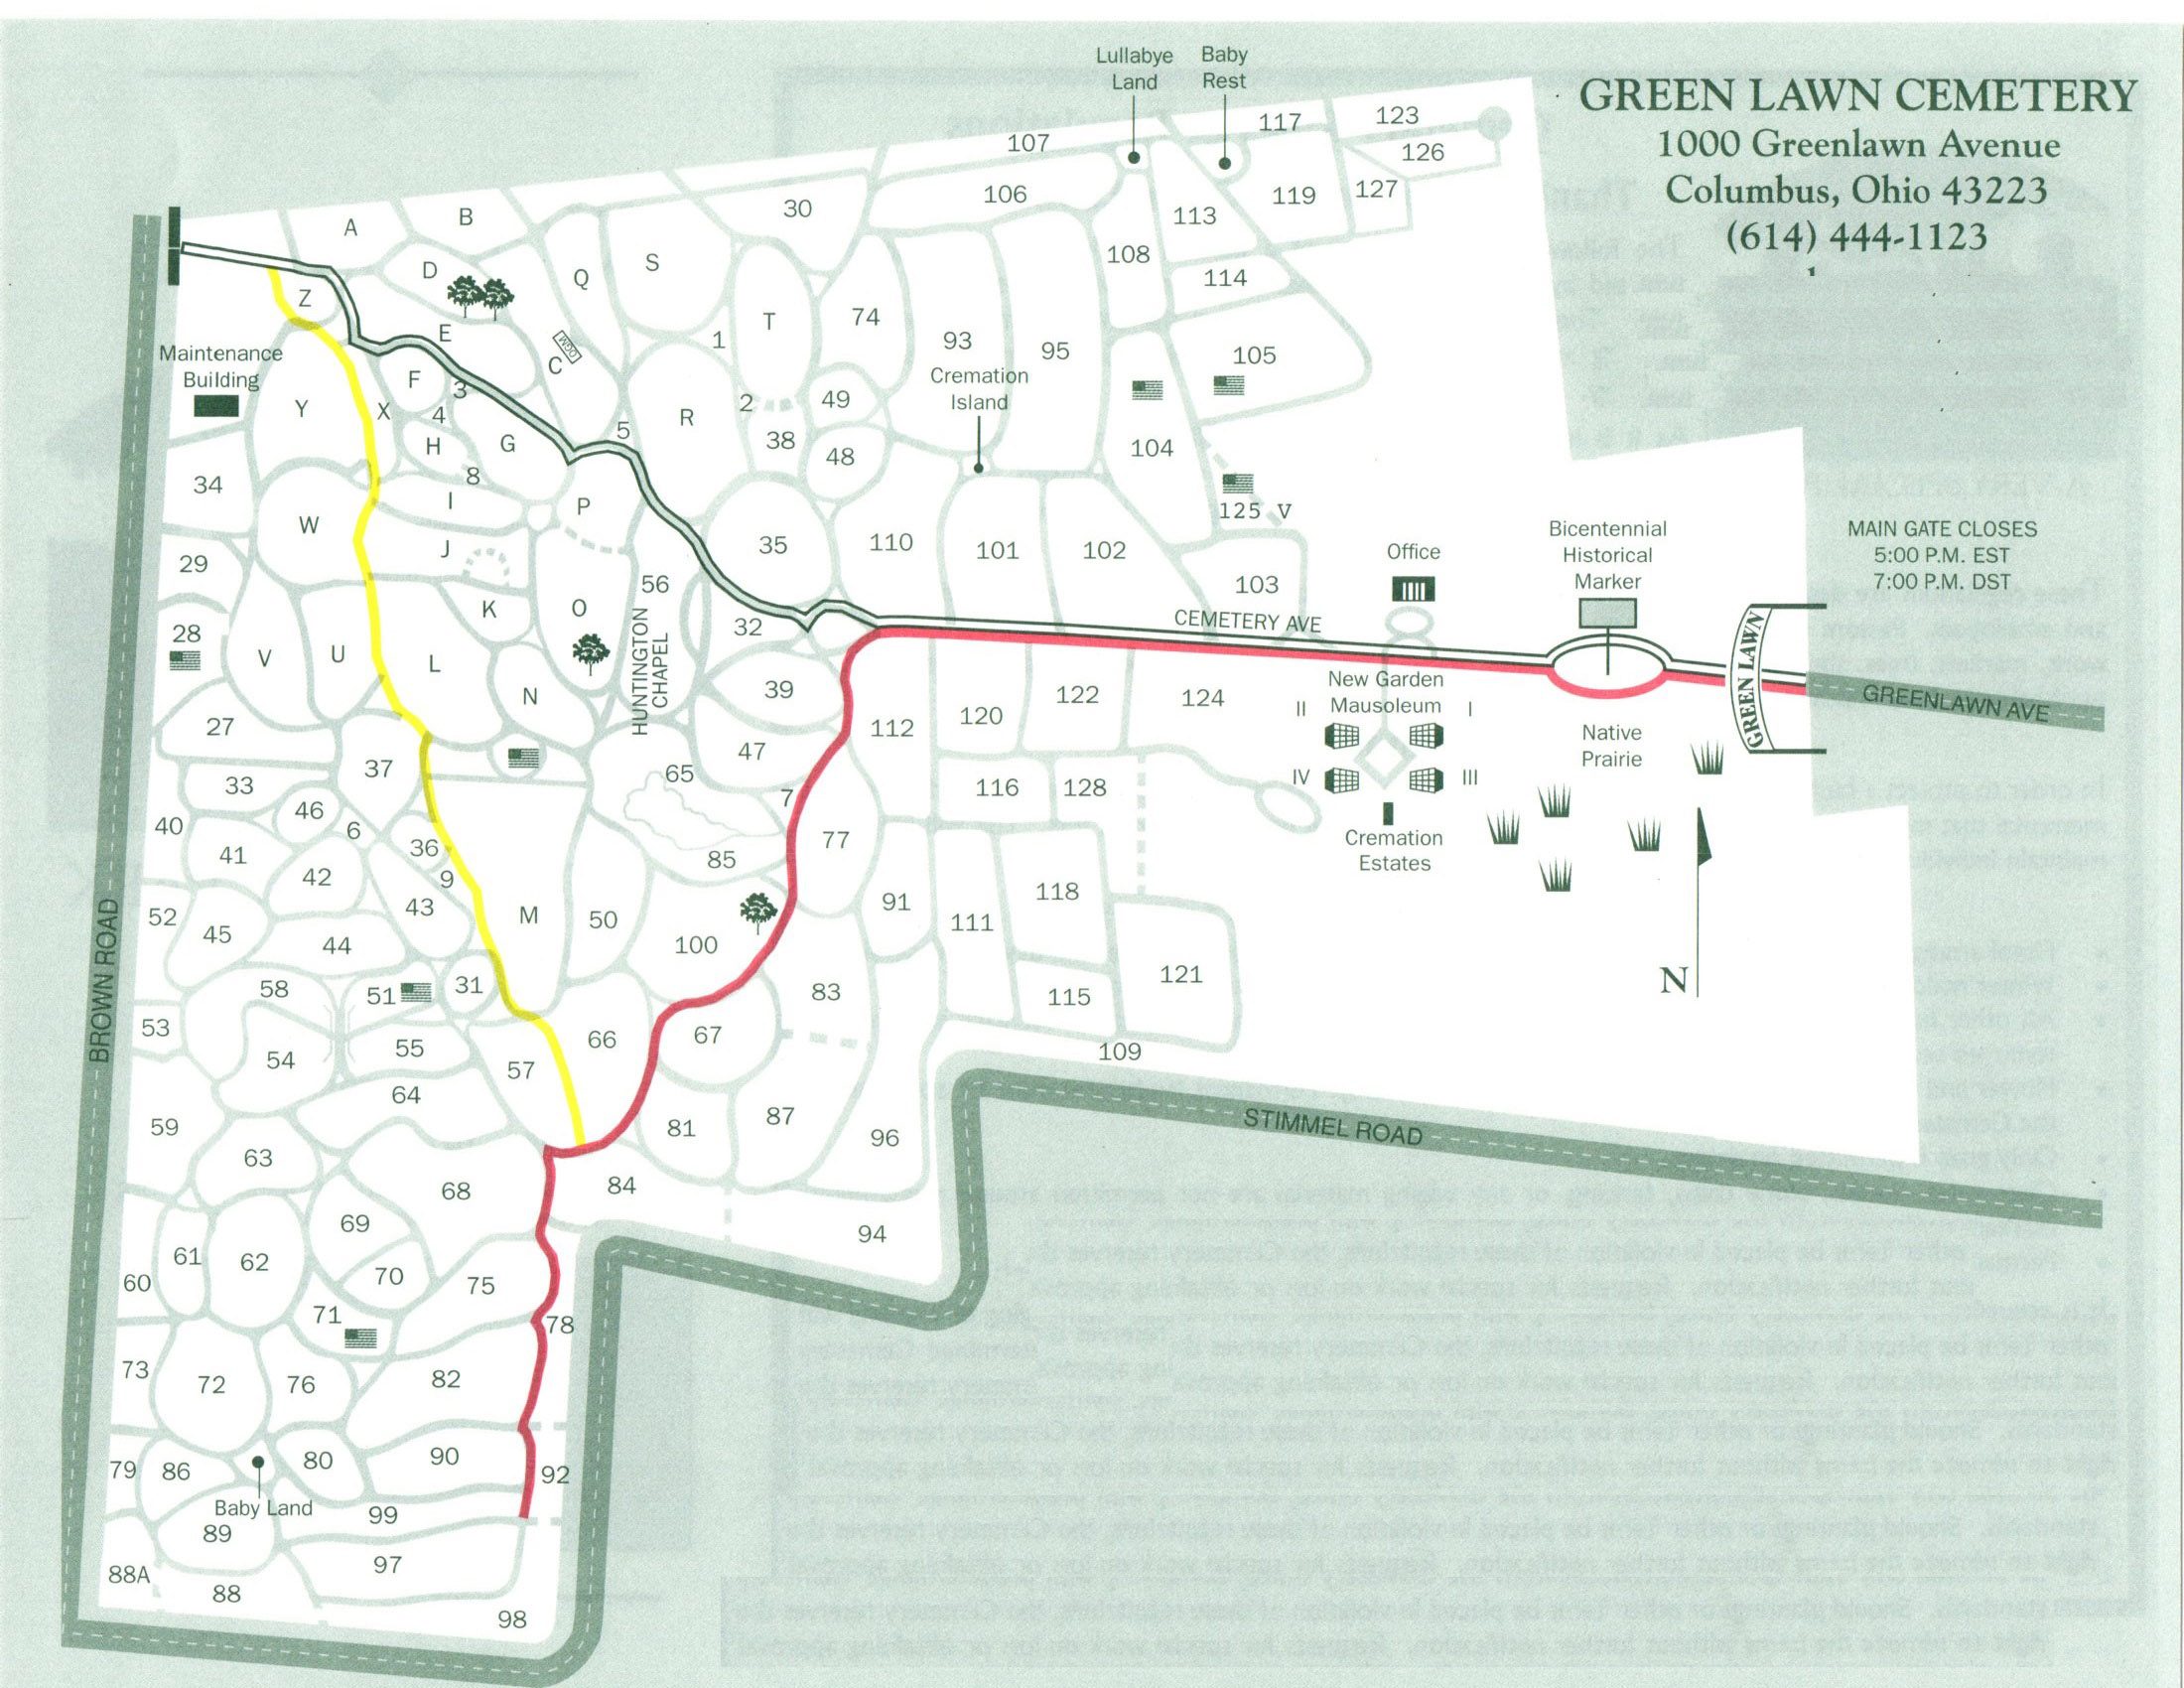 Cemetery map of Green Lawn Cemetery in Columbus, Ohio